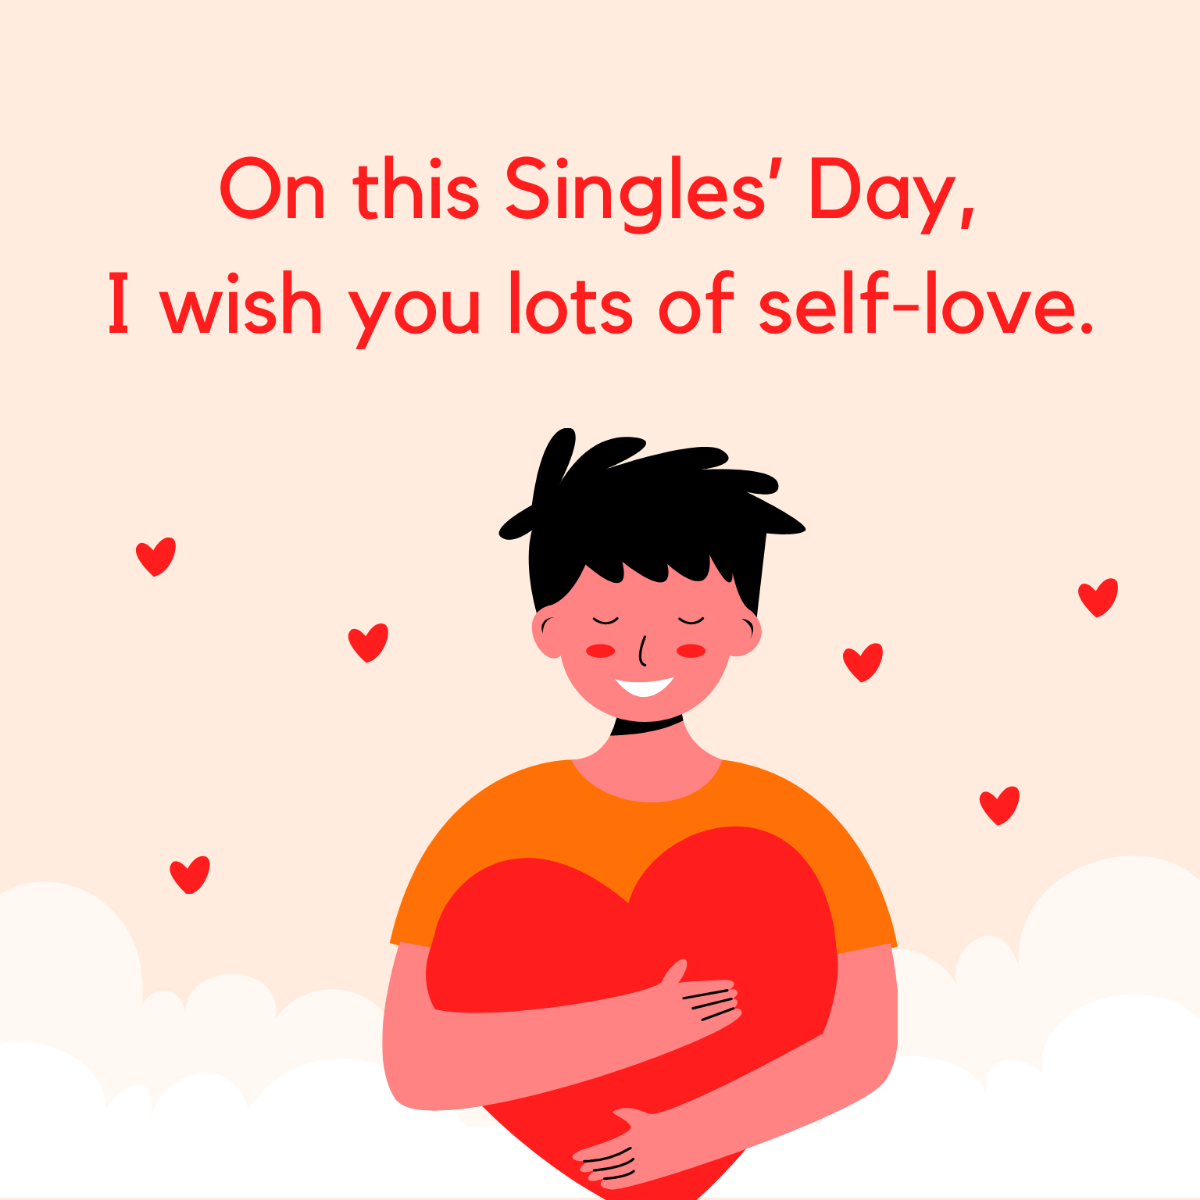 Free Singles Day Wishes Vector Template